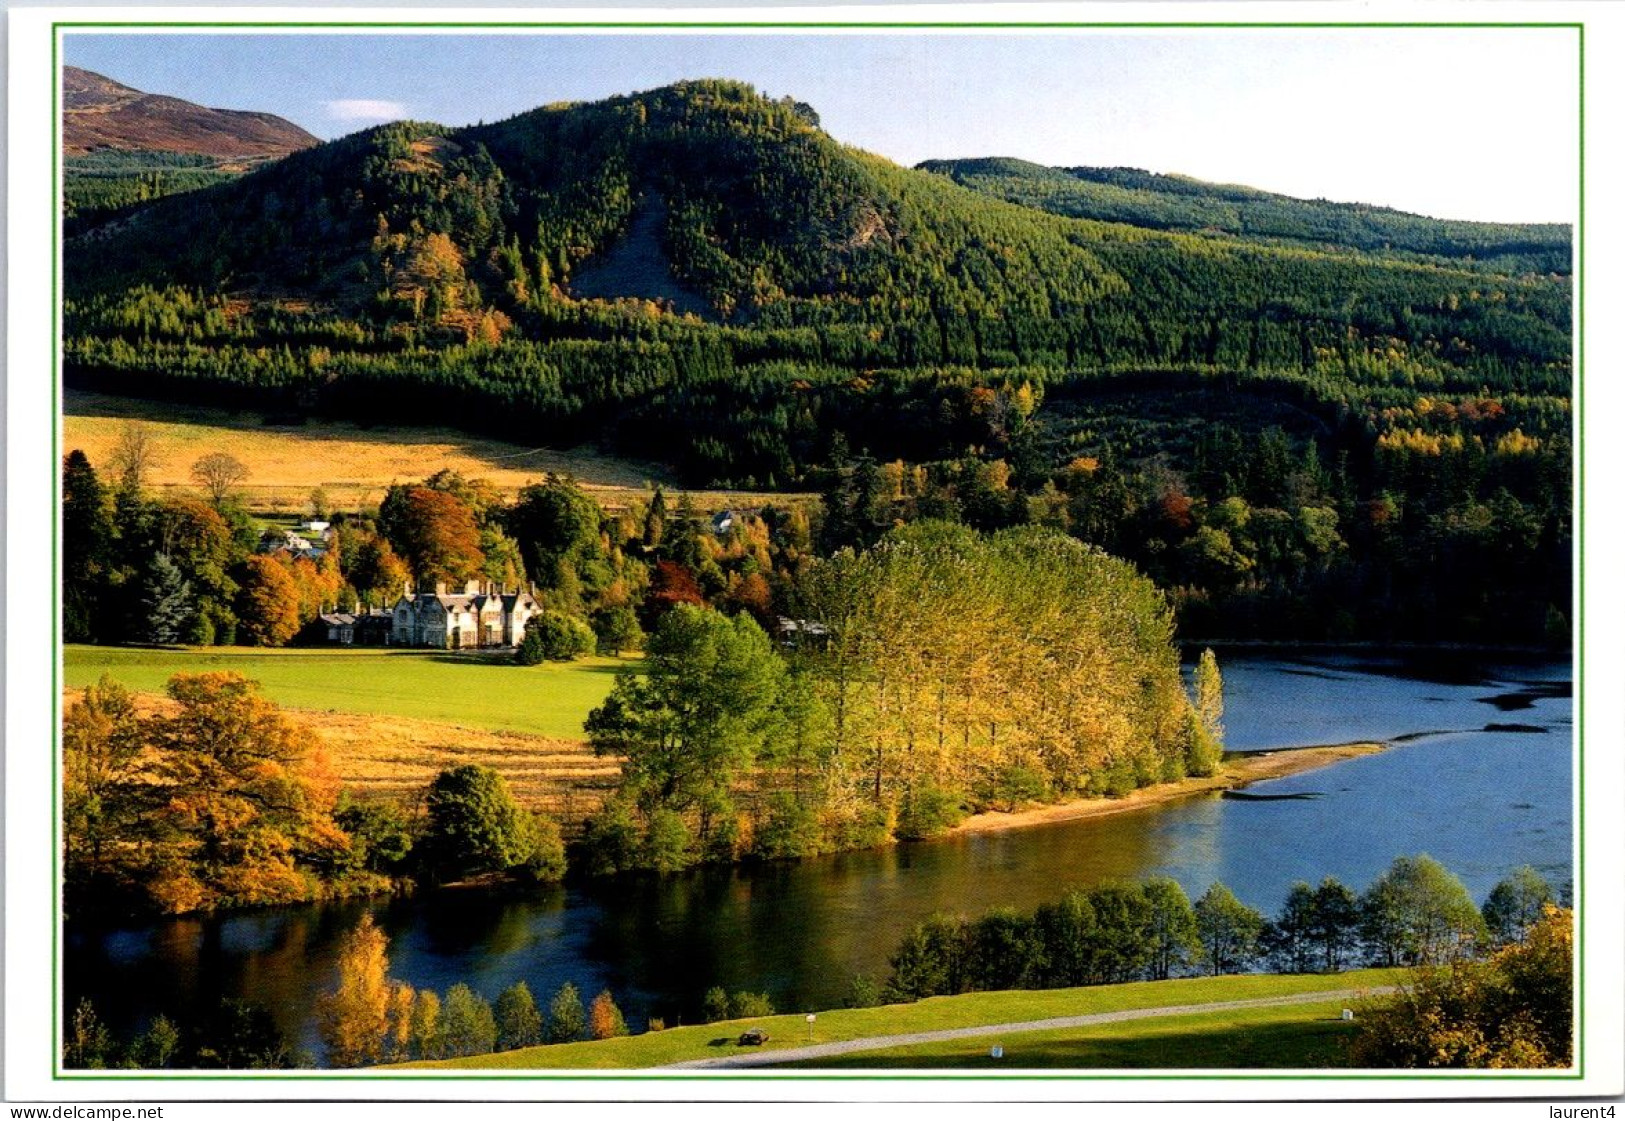 18-7-2023 (2 S 31) UK  - Scotland - River Near Pitlochry - Perthshire